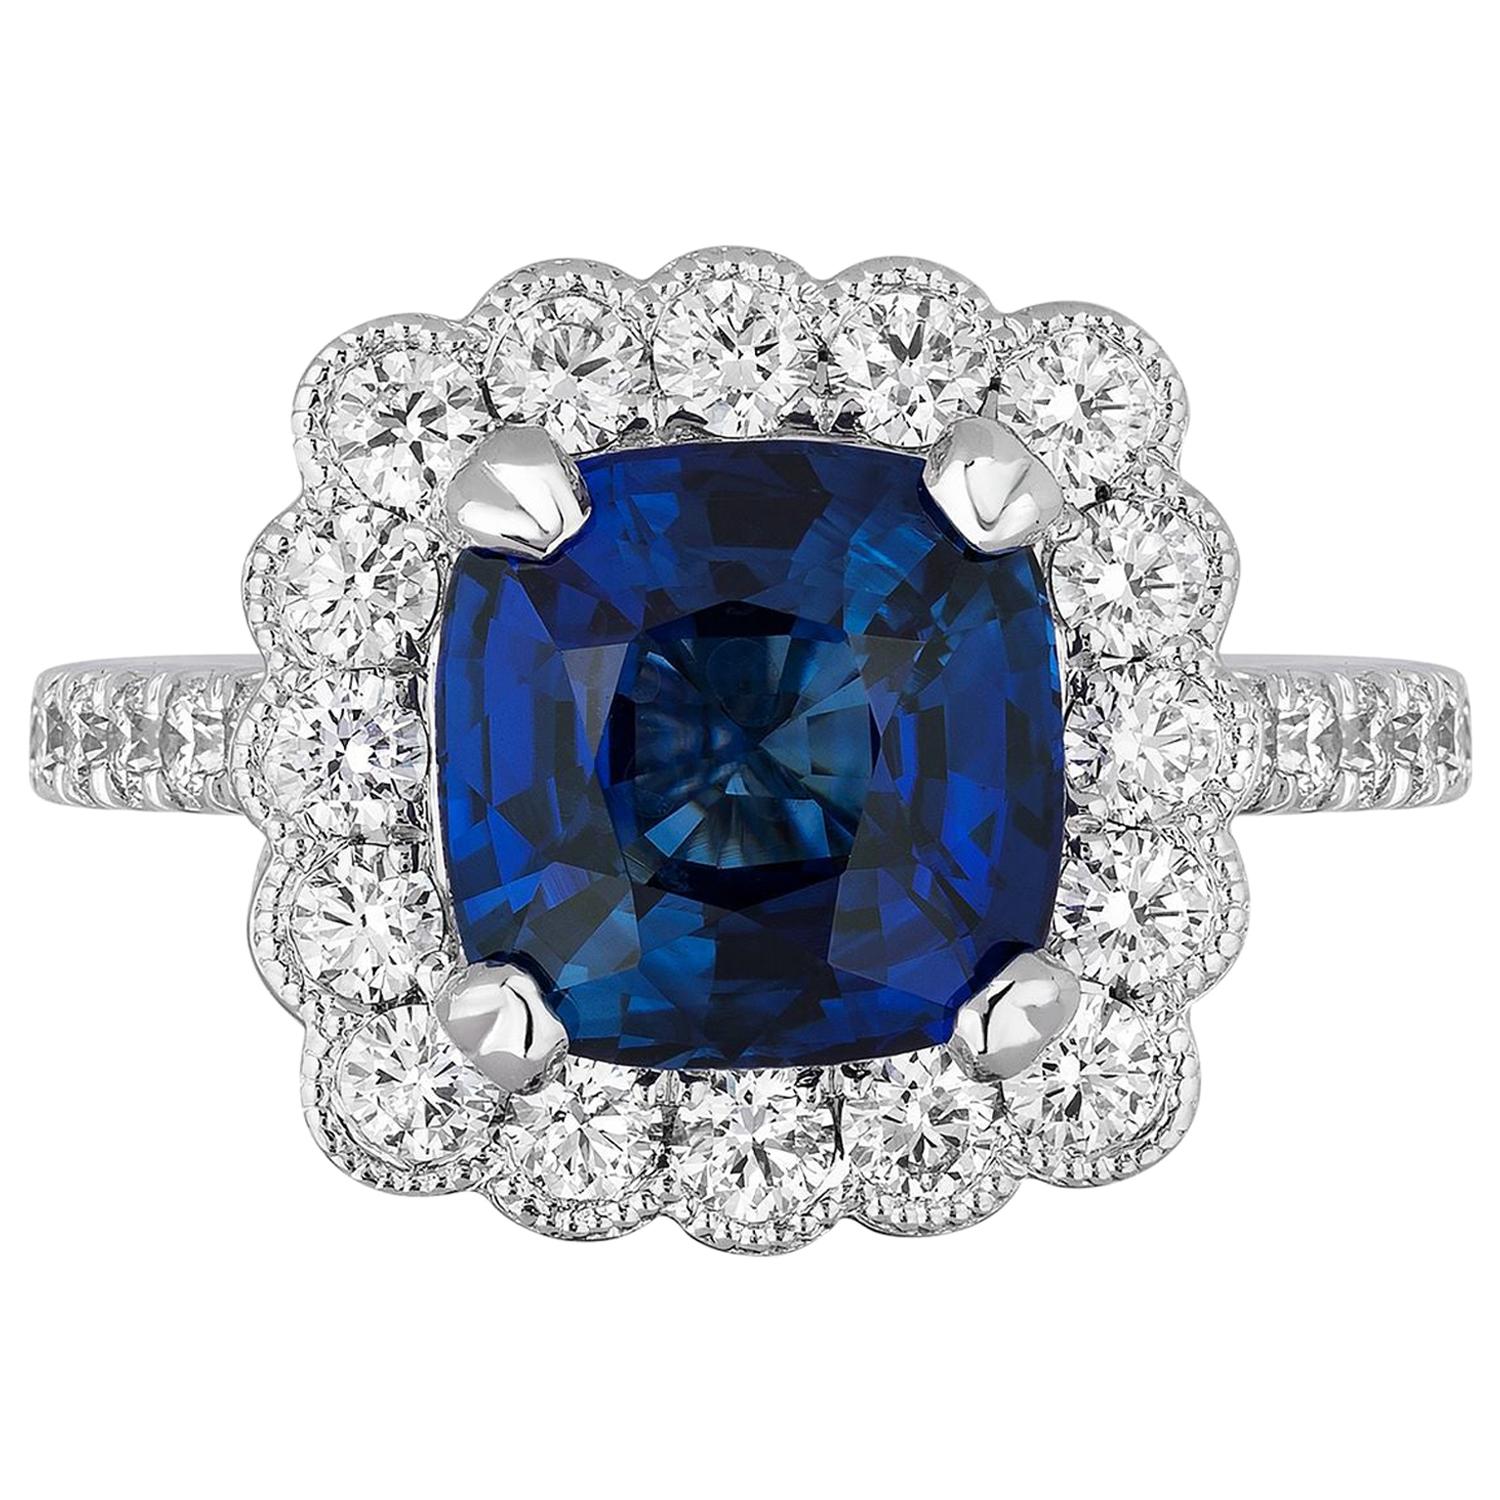 CDC Lab Certified 3.21 Carat Cushion Blue Sapphire Diamonds Cocktail Ring For Sale